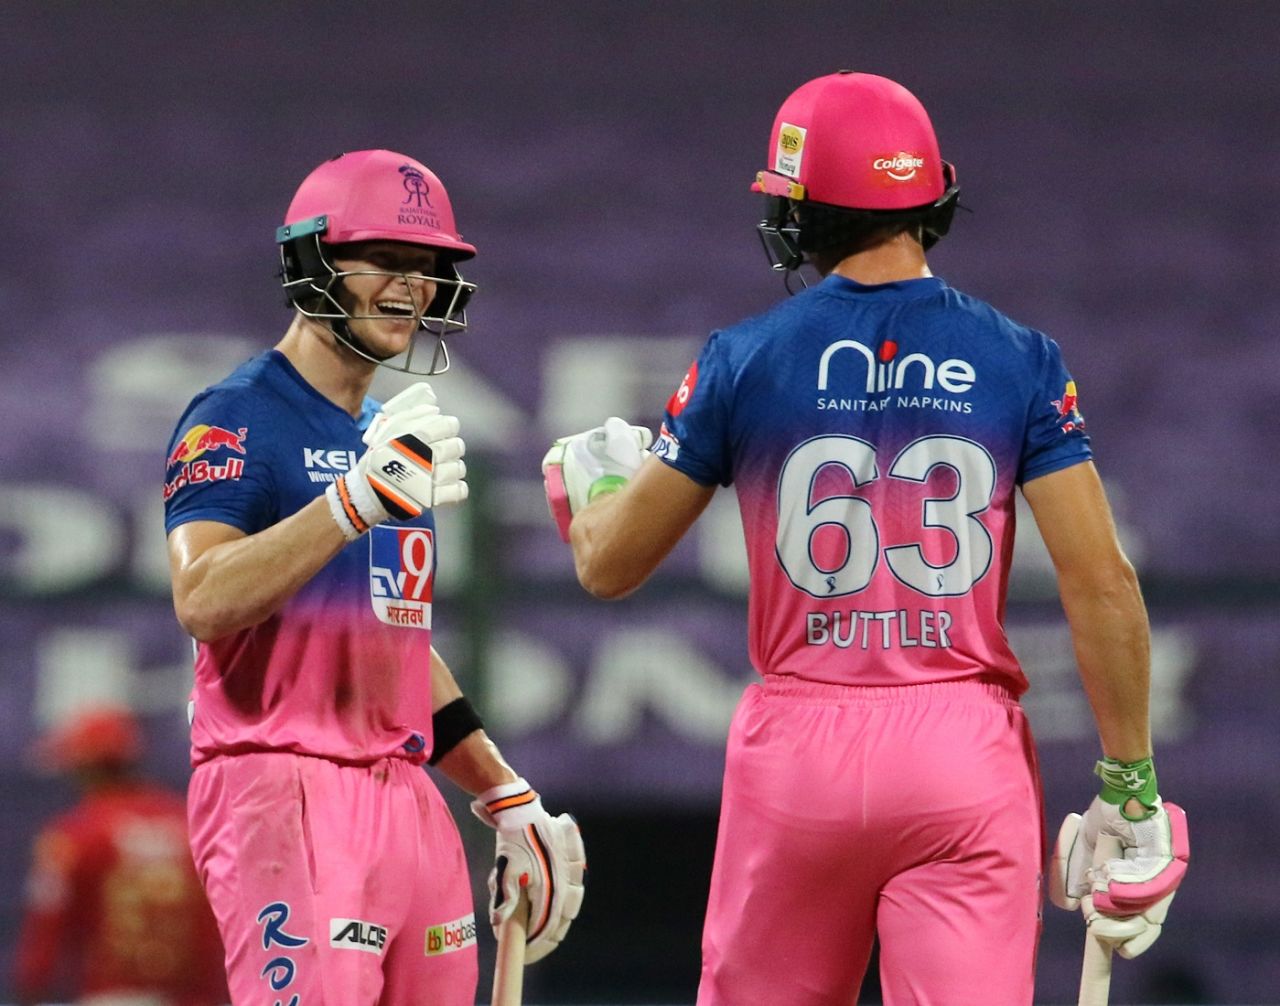 Steven Smith and Jos Buttler finished off the chase, Kings XI Punjab vs Rajasthan Royals, IPL 2020, Abu Dhabi, October 30, 2020